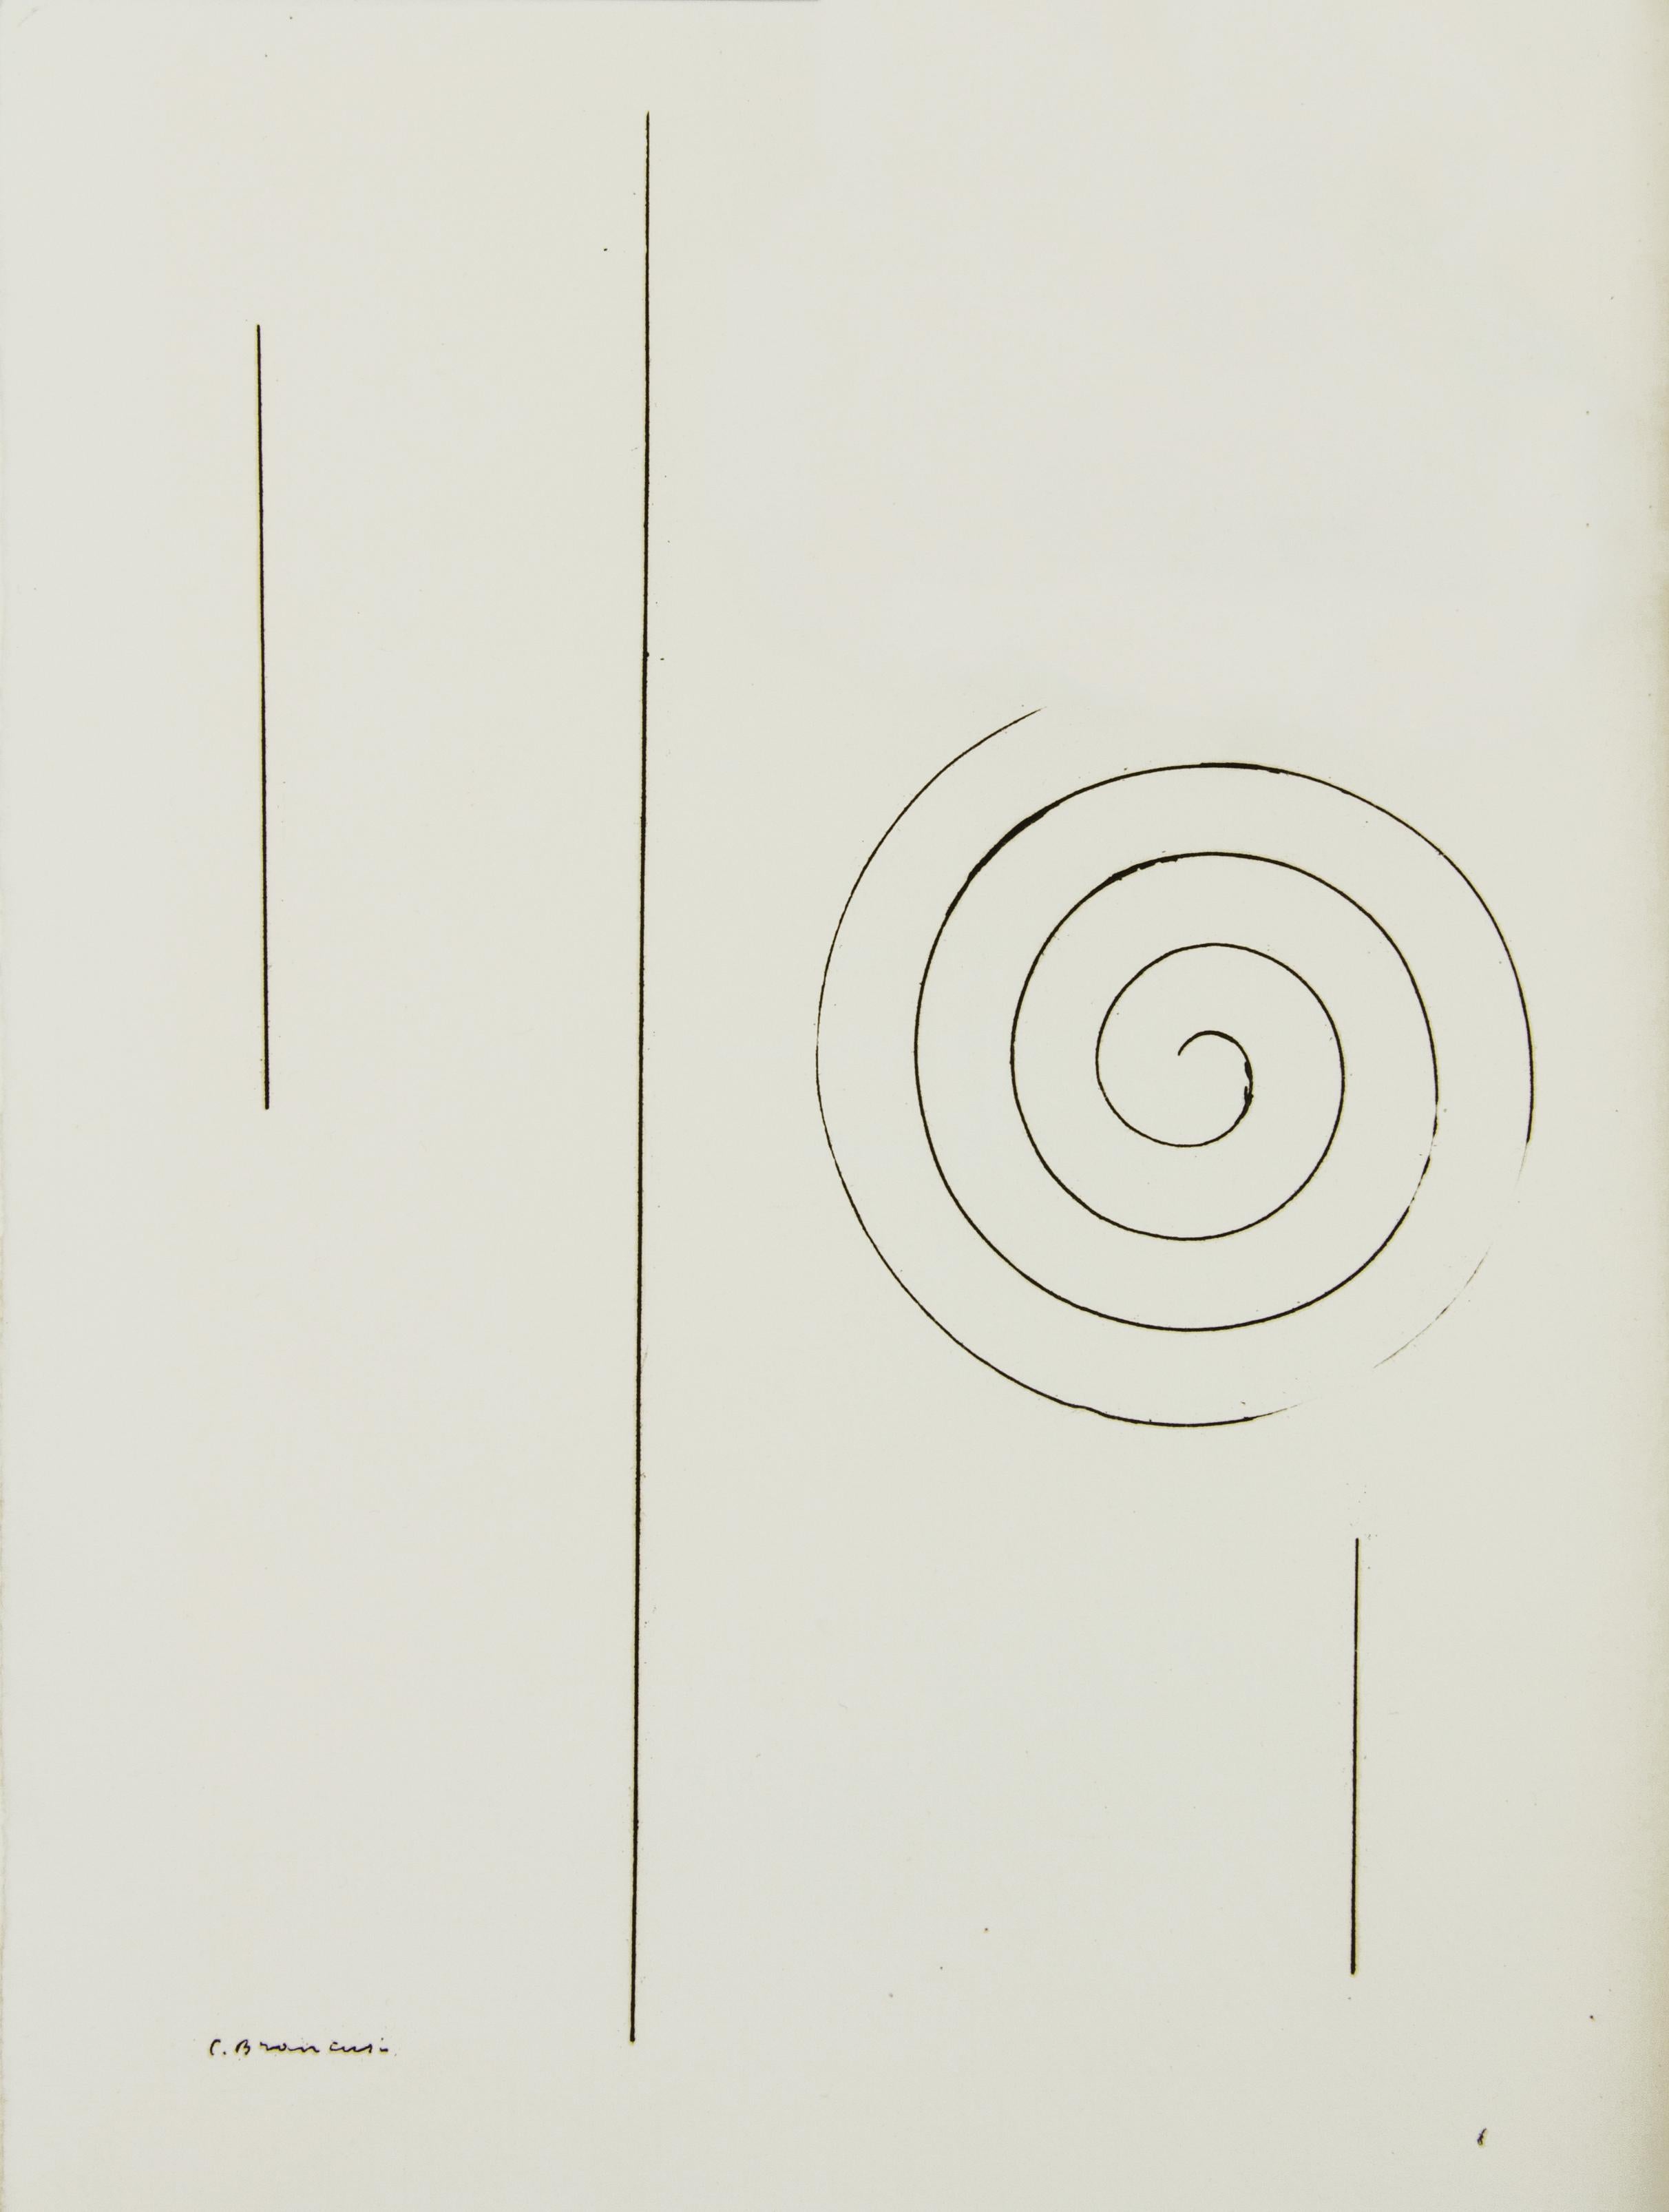 Tales Told of Shem and Shaun.  - Art by Constantin Brancusi